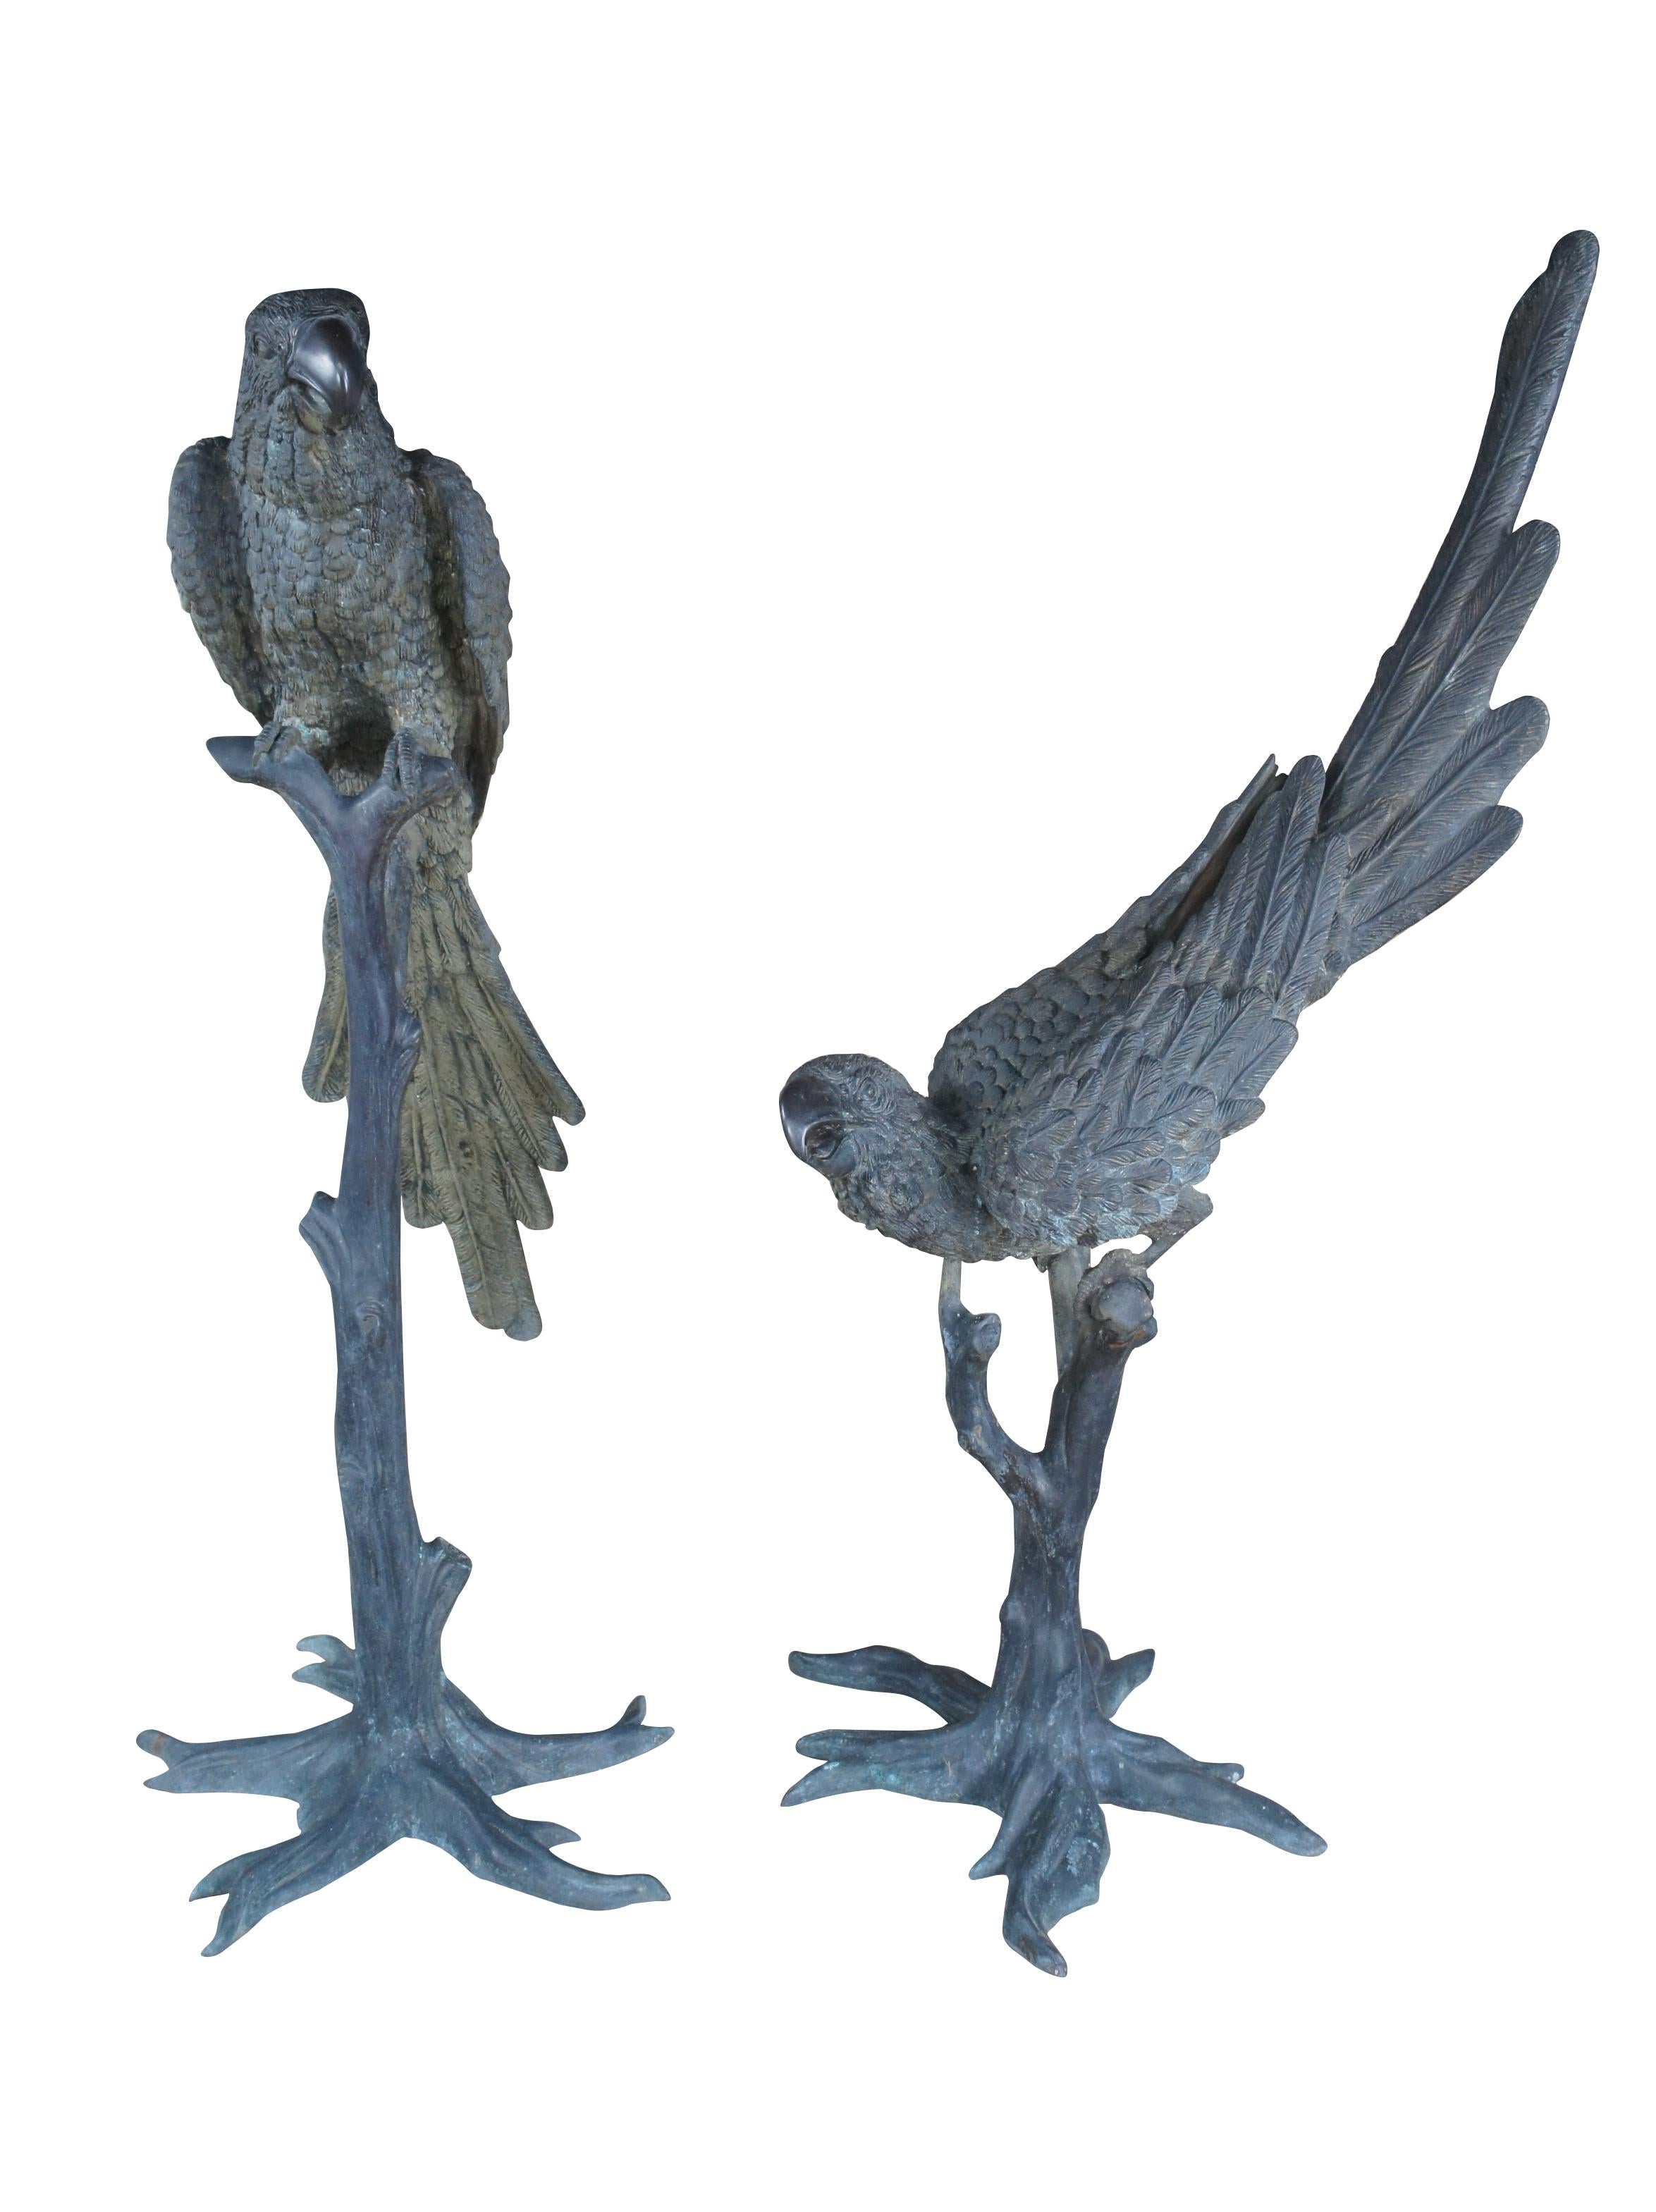 Exquisite Antique Pair of French Art Deco bronze oversized Macaw Parrots or birds perched on stands with nice patina, circa 1920s. These monumental art sculptures feature a realistic tree trunk that supports each parrot rendered in explicit details.